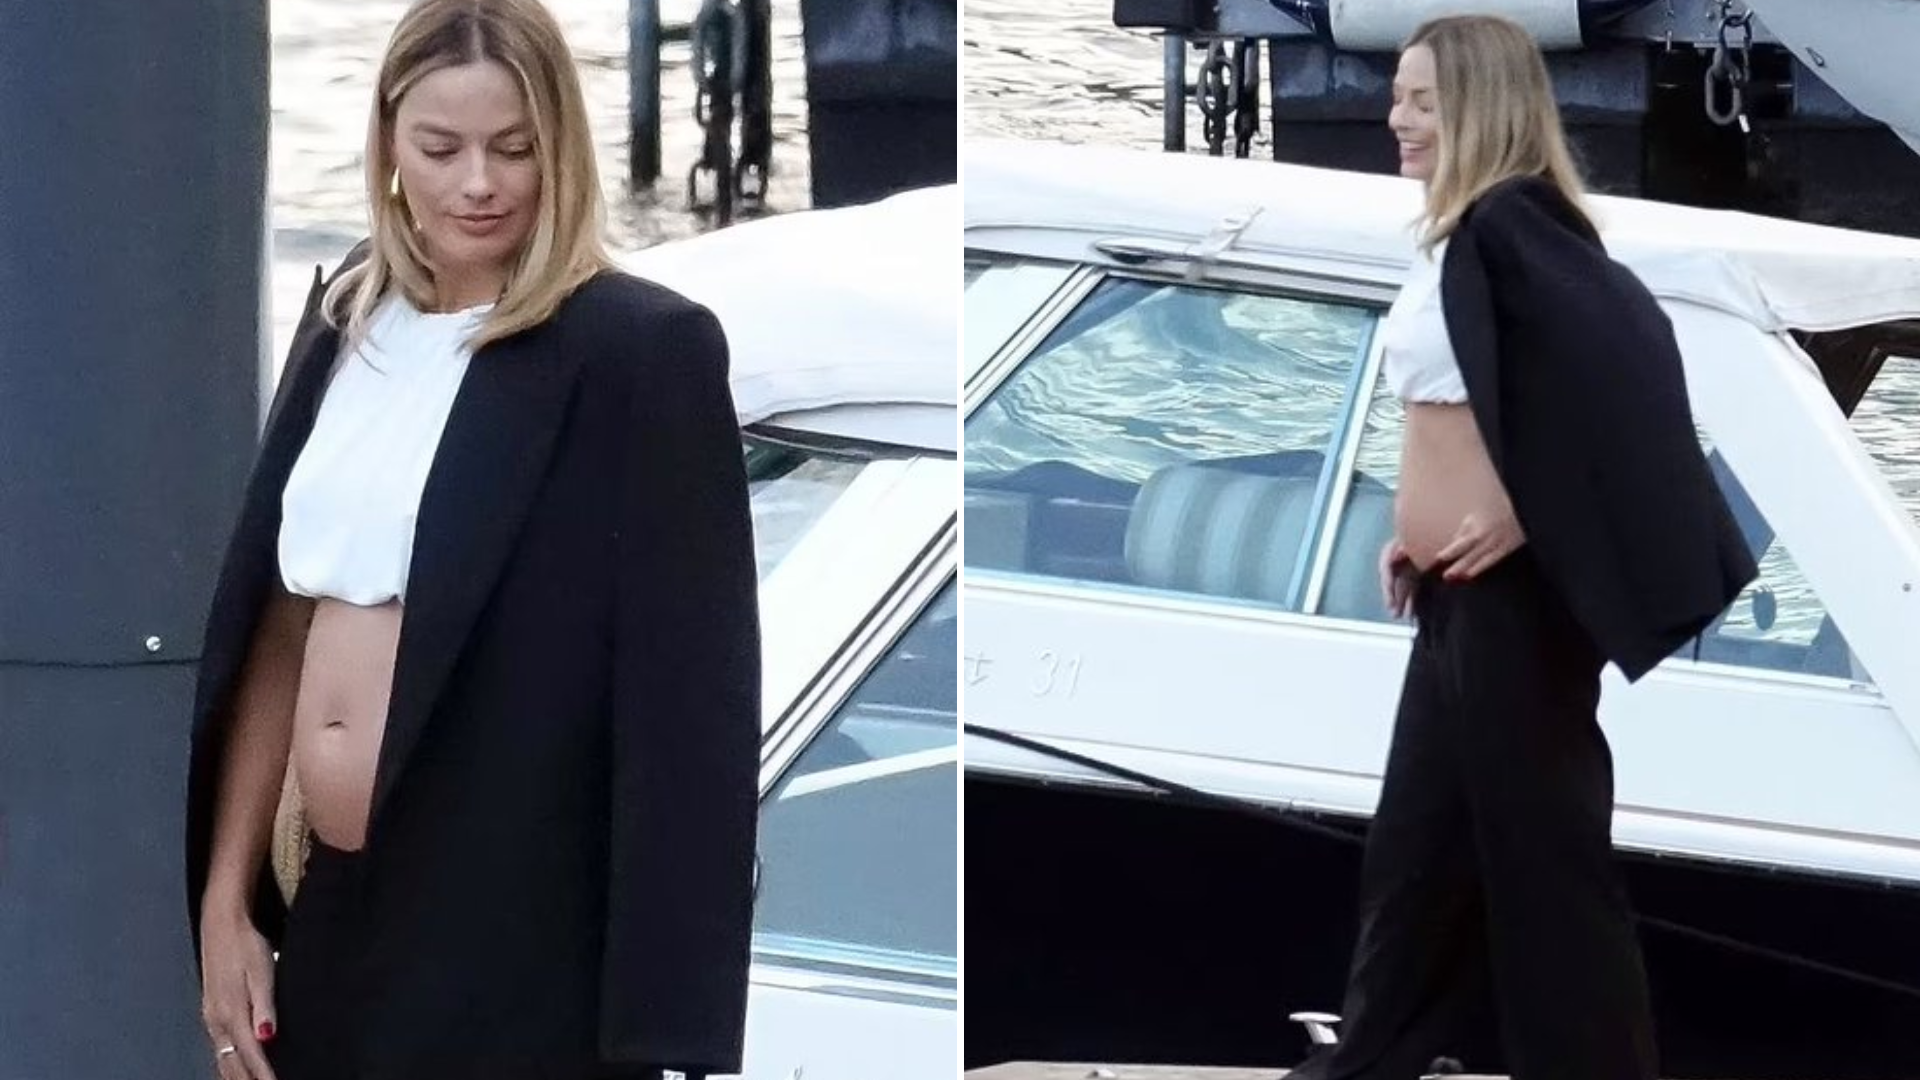 Margot Robbie Is Pregnant With Her First Child With Husband Tom Ackerley- Reports